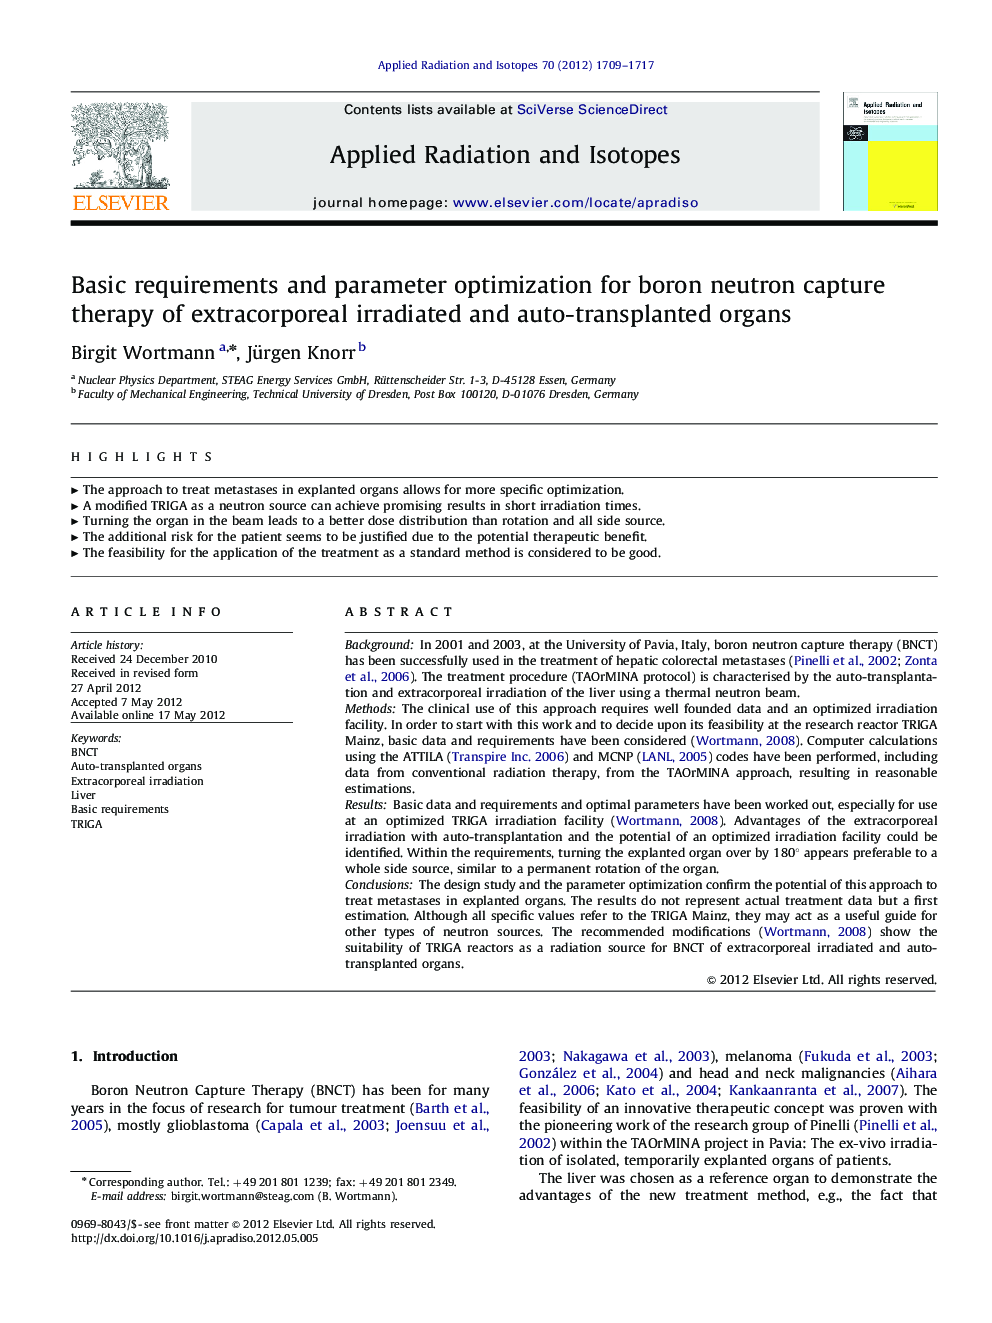 Basic requirements and parameter optimization for boron neutron capture therapy of extracorporeal irradiated and auto-transplanted organs